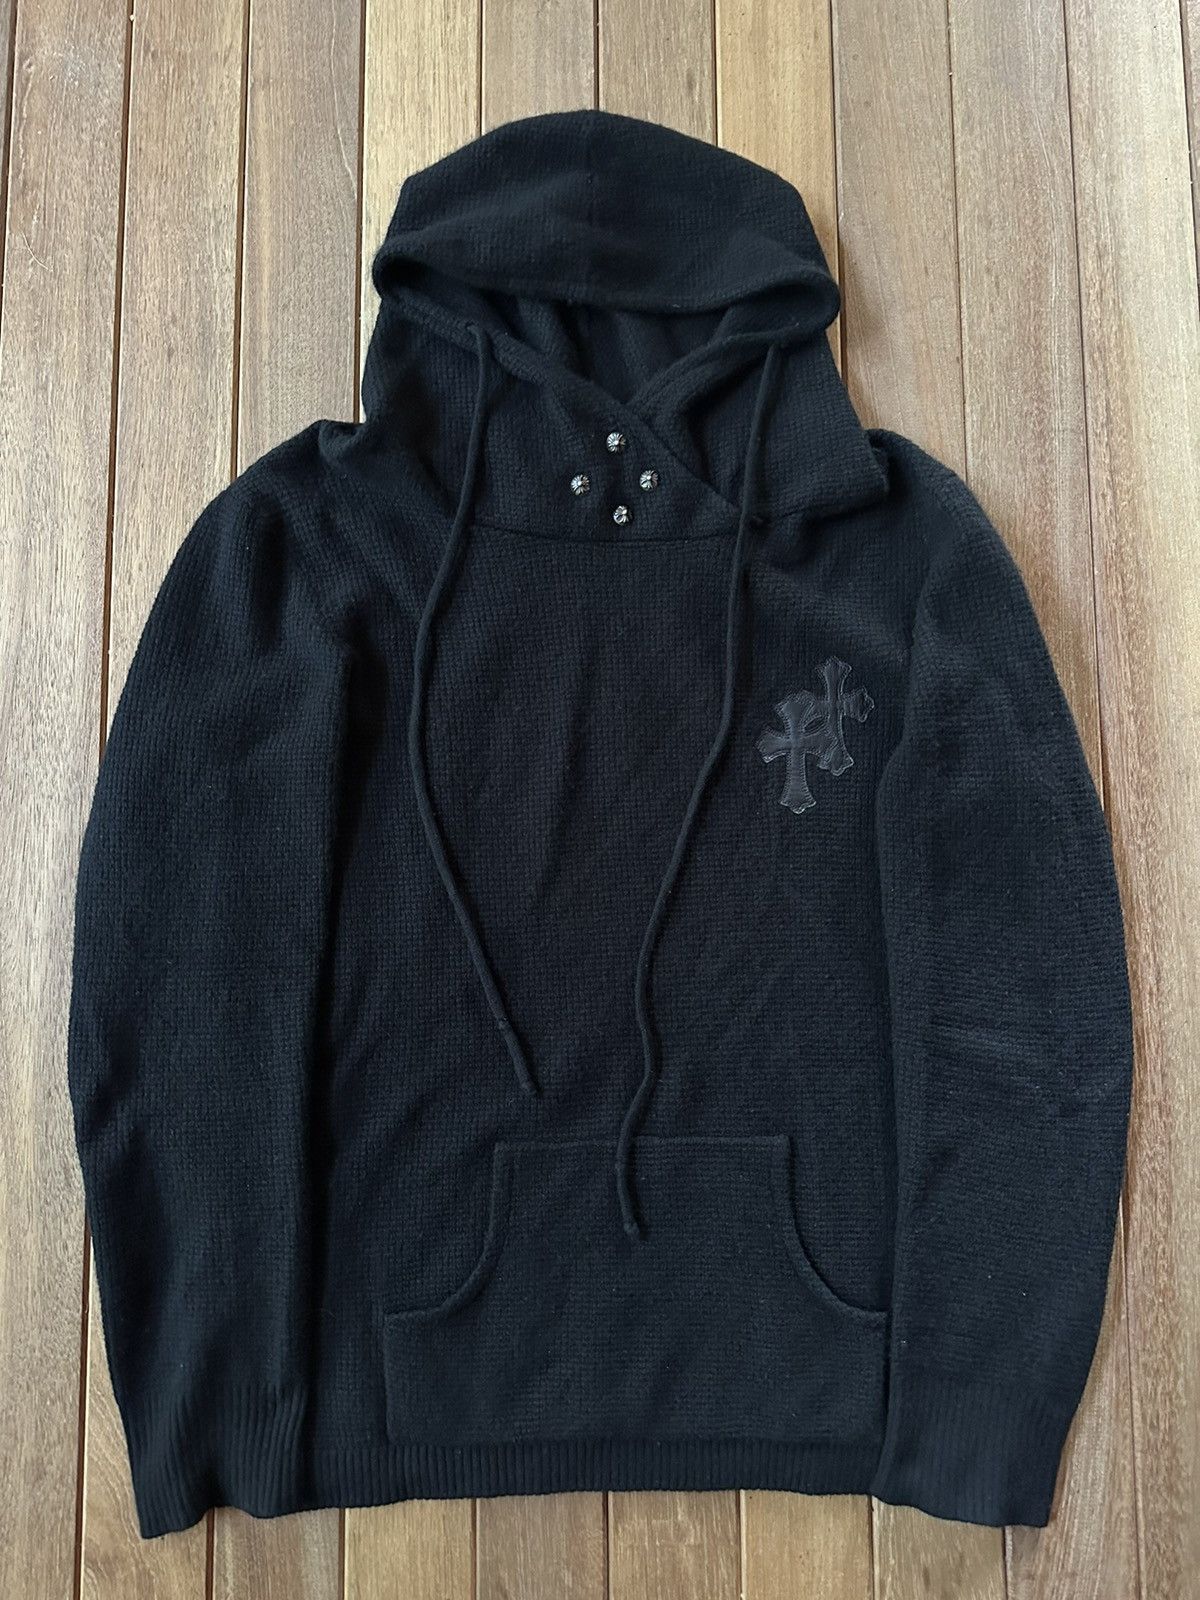 Chrome Hearts Cashmere Hoodie Sweater Oversize fit | Grailed